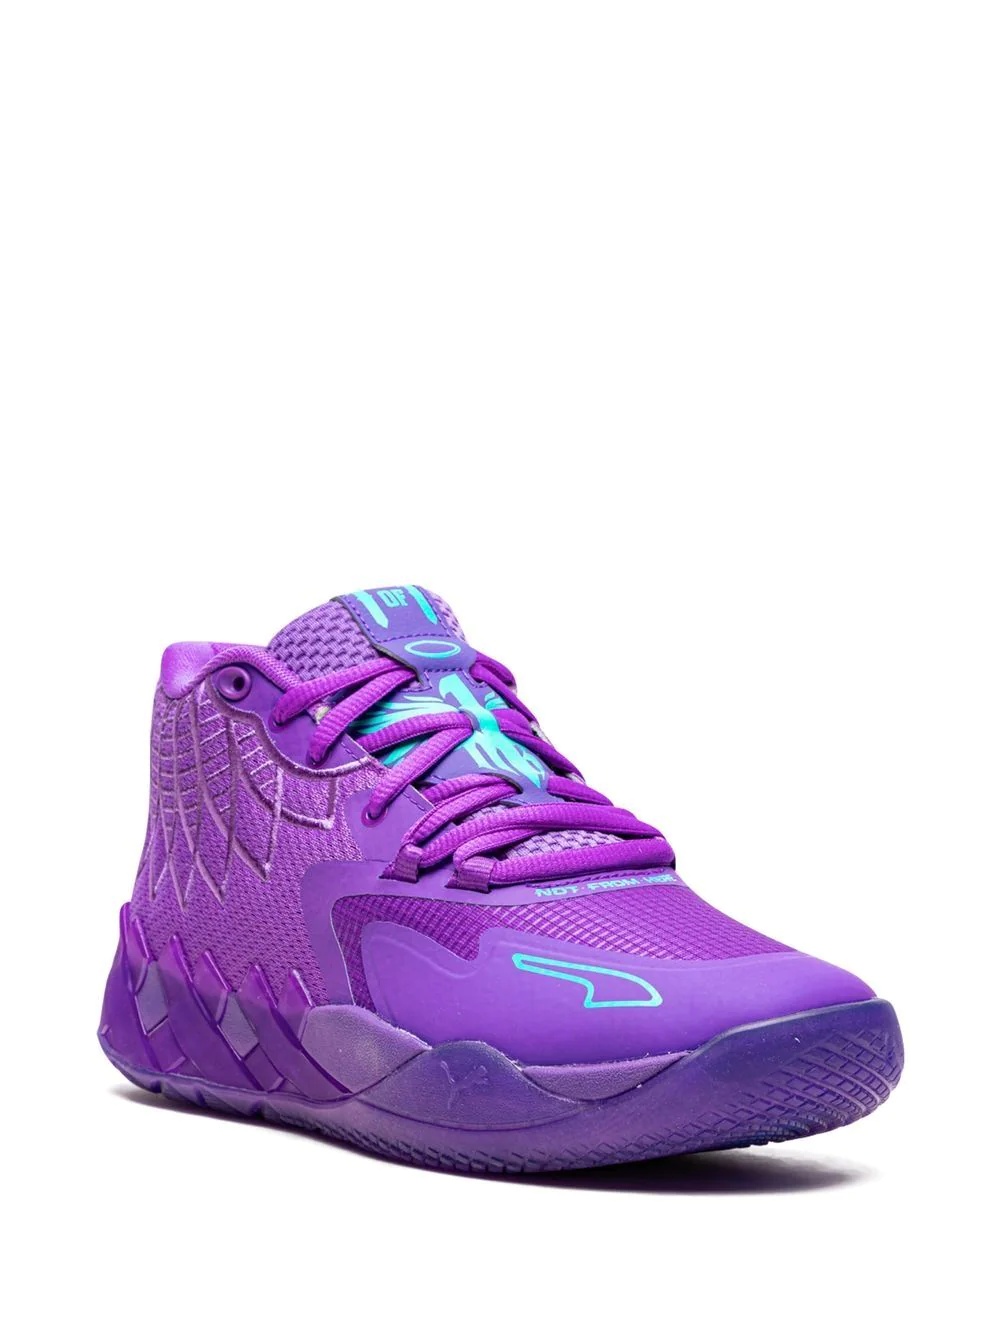 MB1 "Lamelo Ball Queen City" sneakers - 2